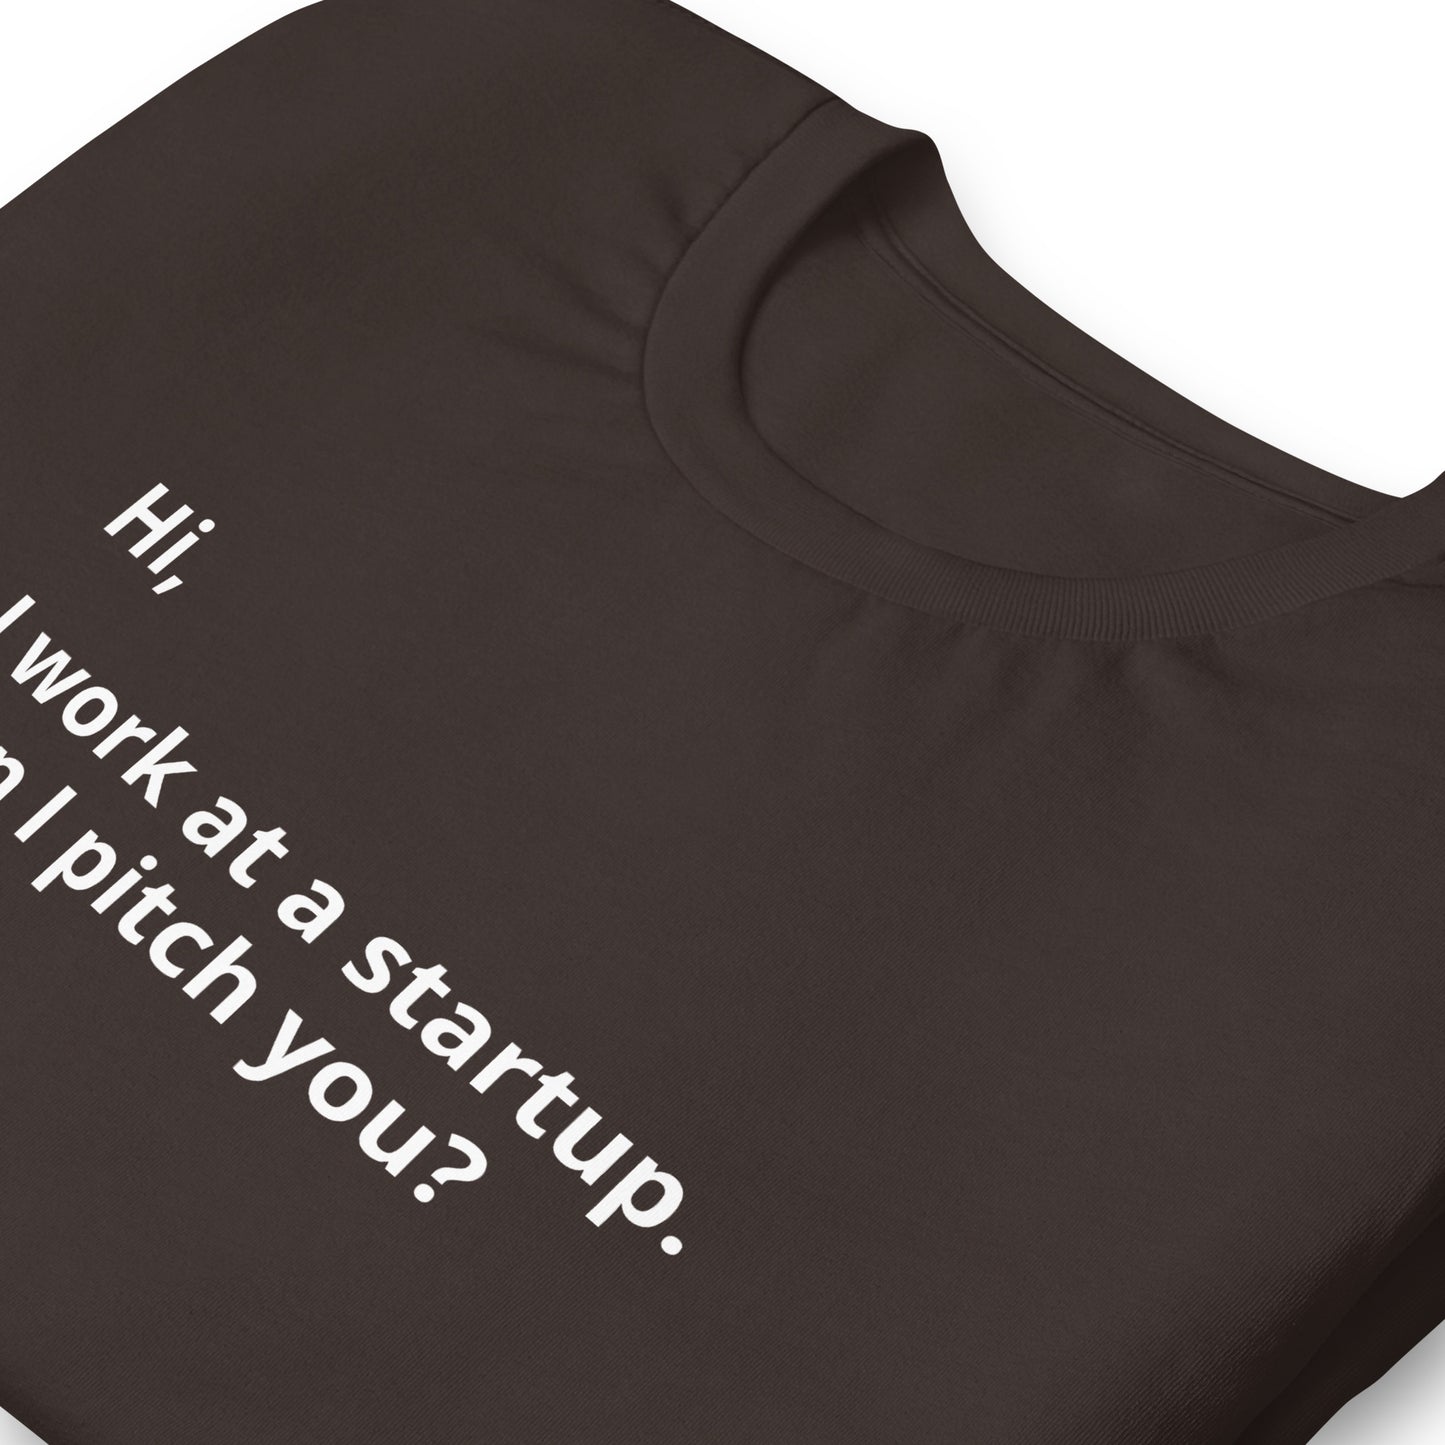 I Work At A Startup. Can I Pitch You? Unisex T-Shirt (Text On Both Sides Of Shirt)